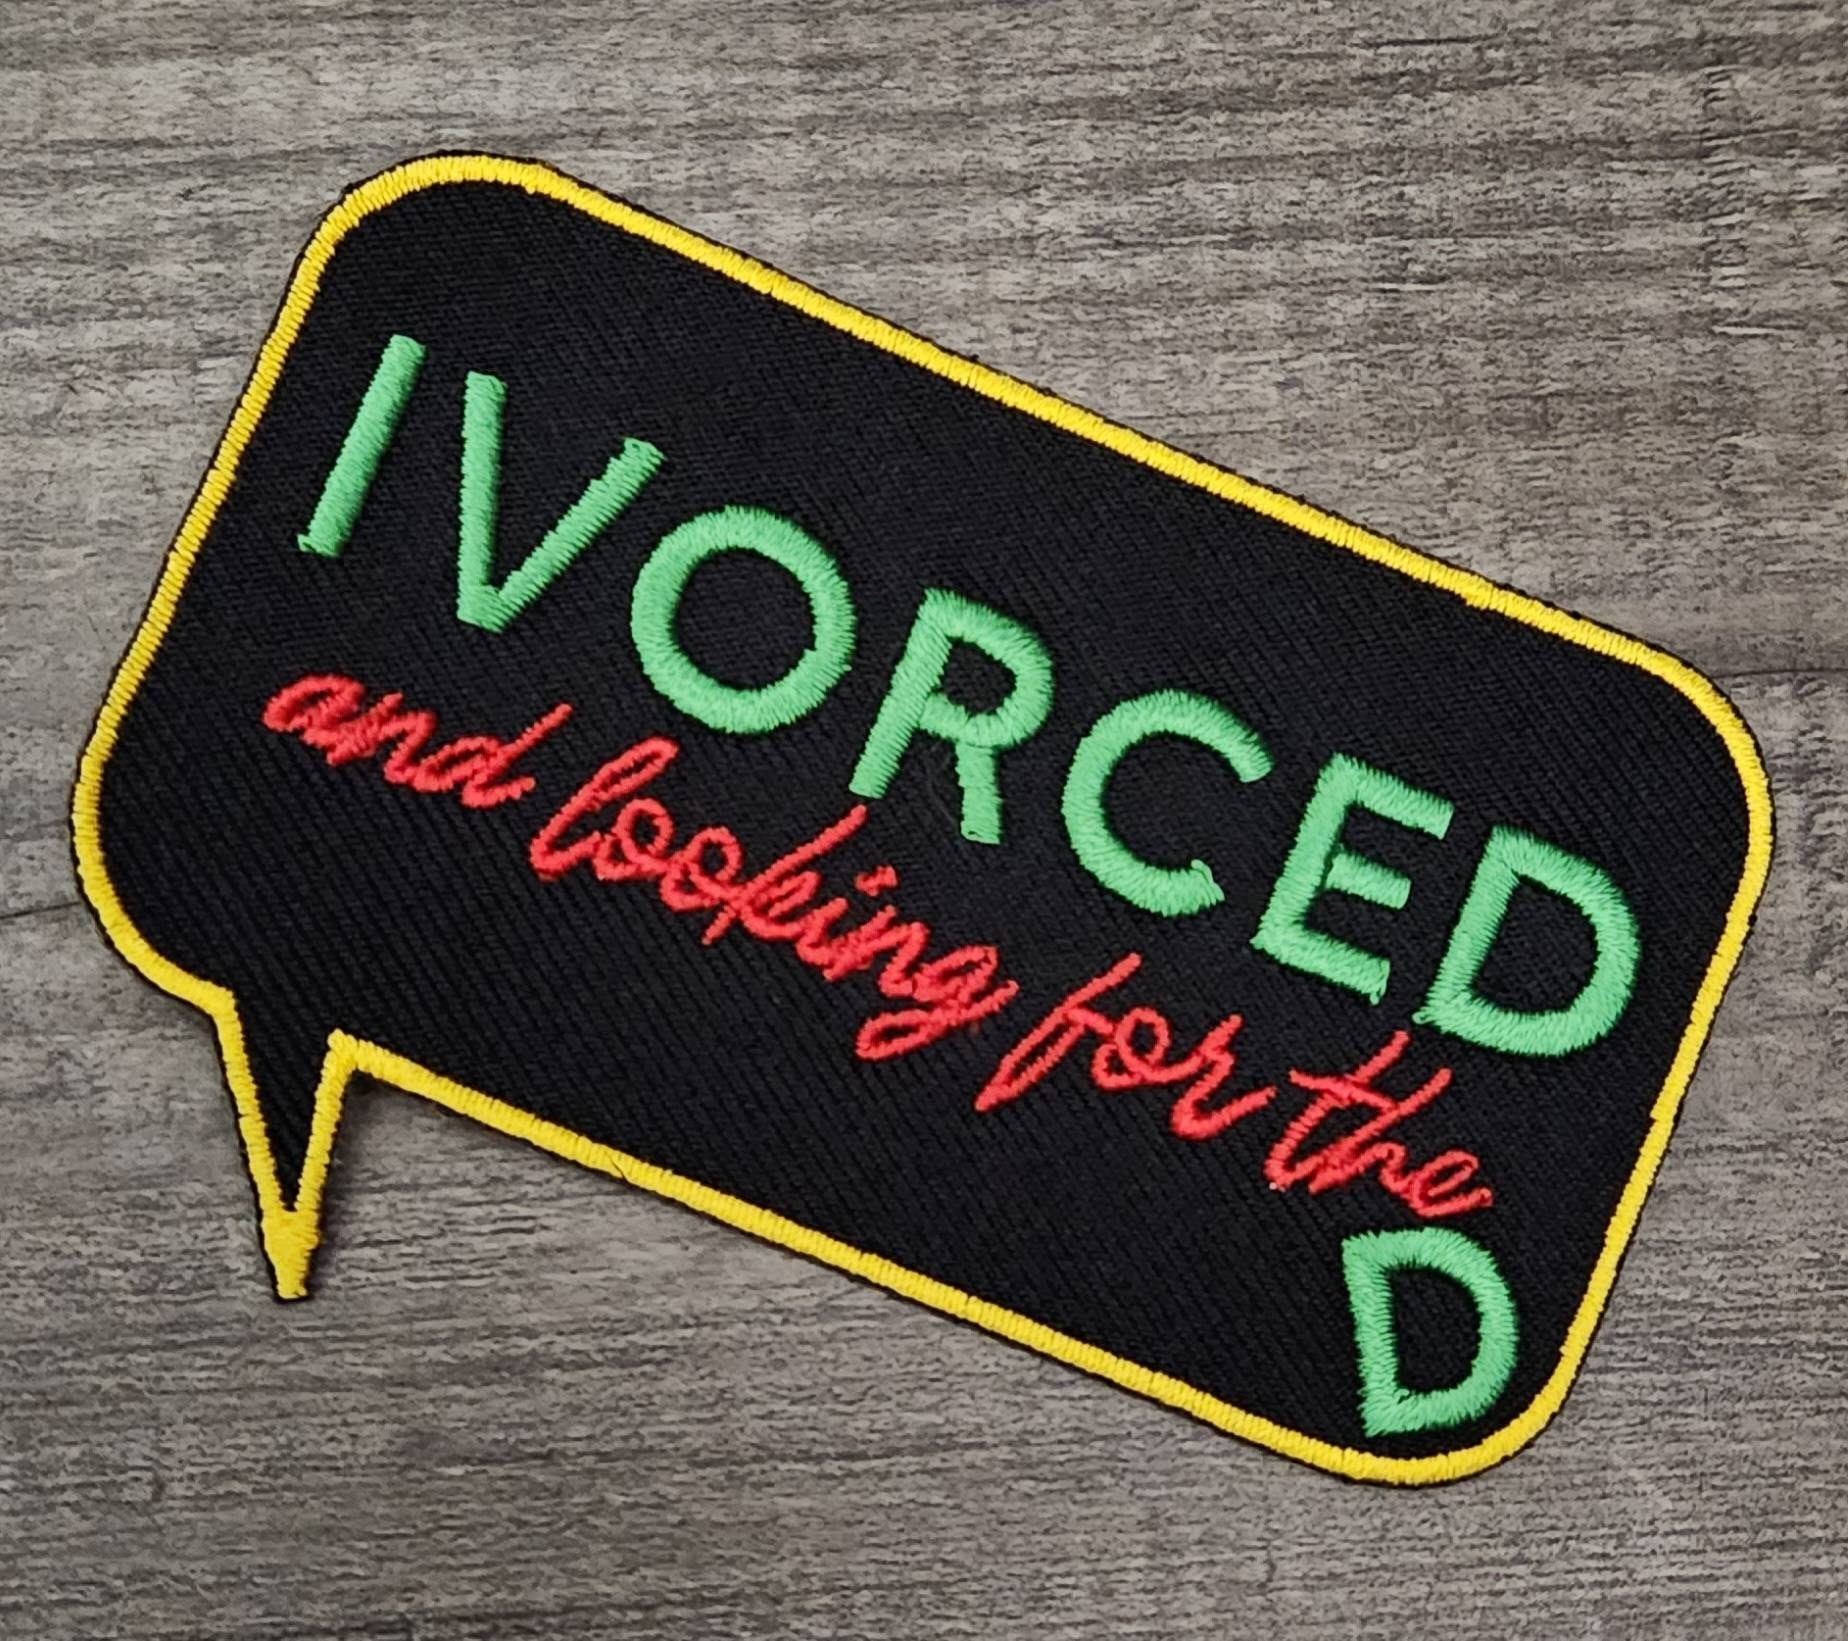 Funny Patch, 1-pc "Ivorced and Looking for the D" Statement Patch, Sz 3.6"x3.5", for Clothing, Iron-On Embroidered Patch, Divorce Gift